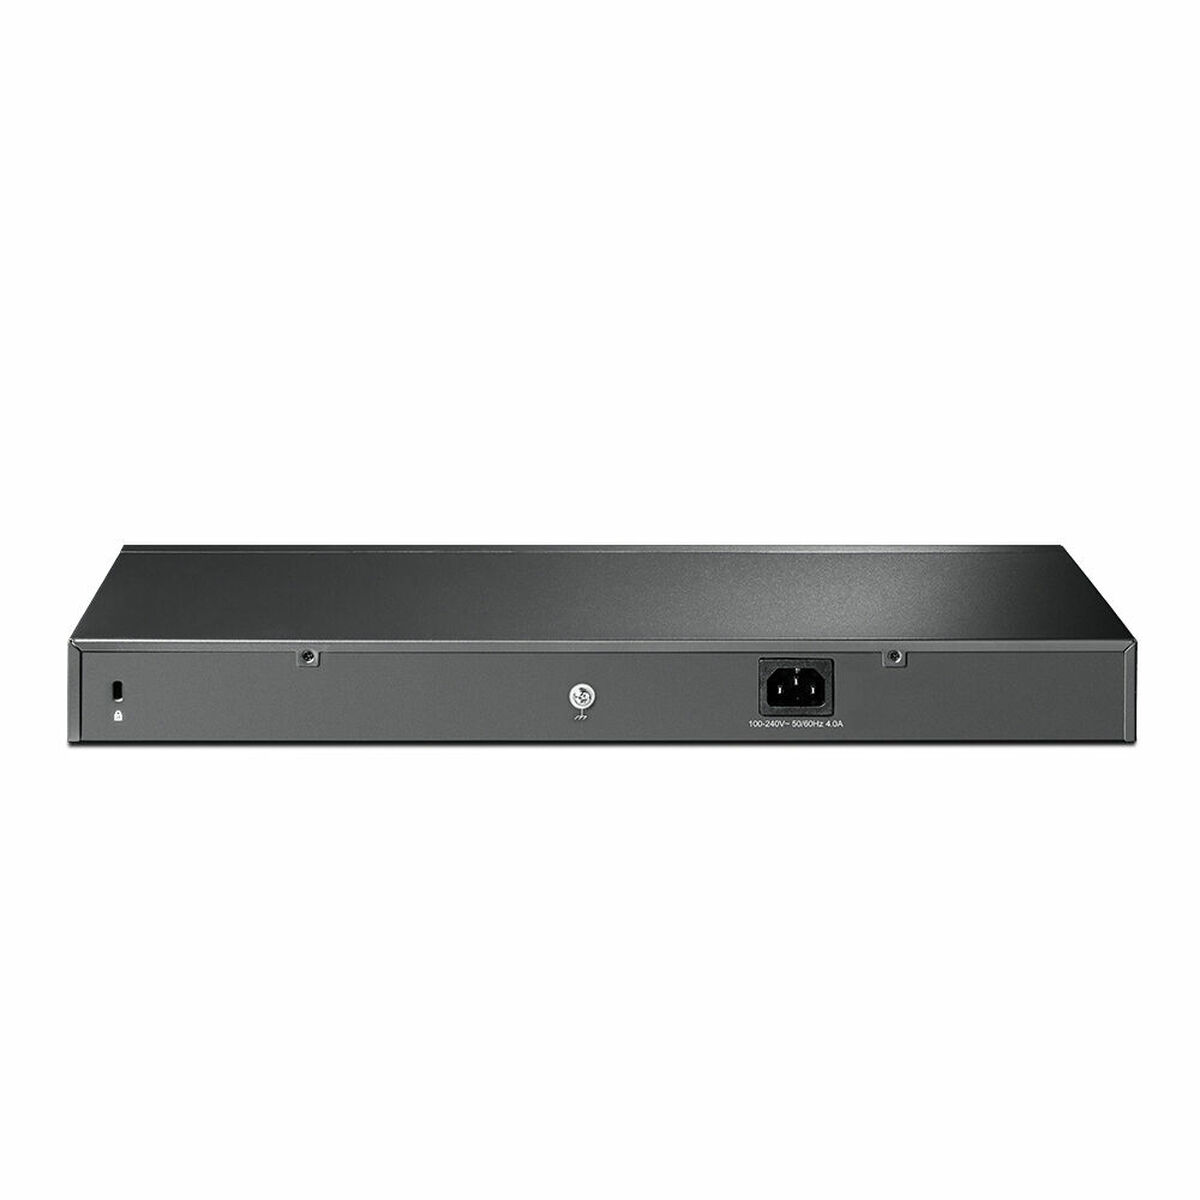 TP-LINK TL-SG3210XHP-M2 Switch 8